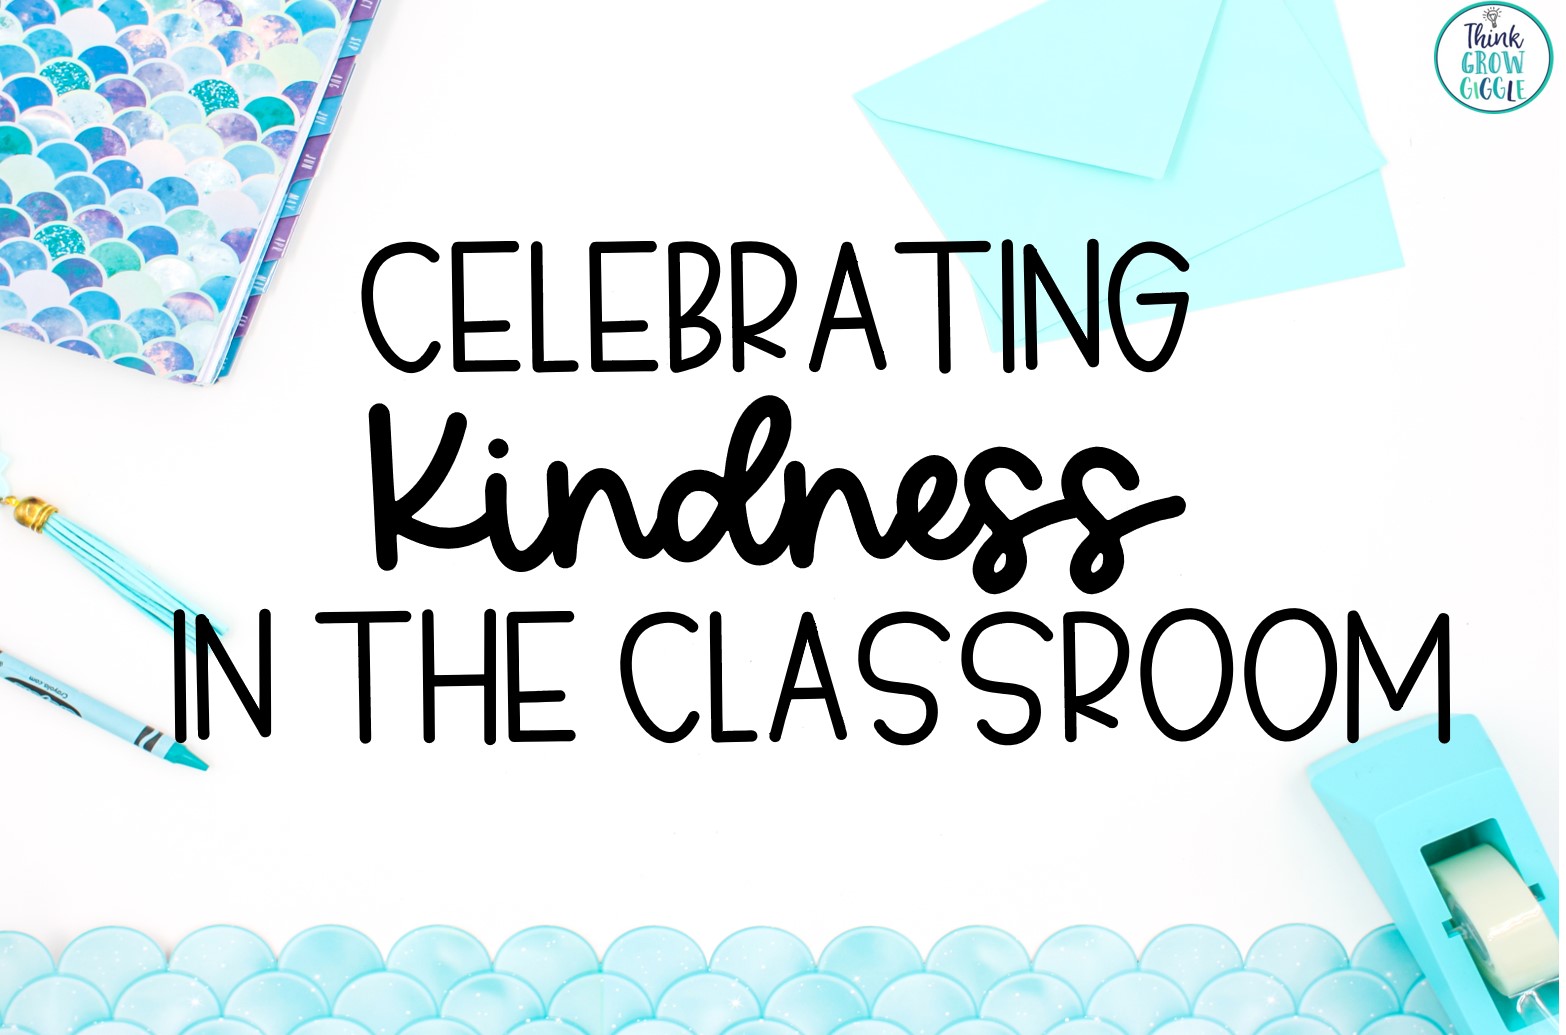 Teaching Kindness in the Classroom